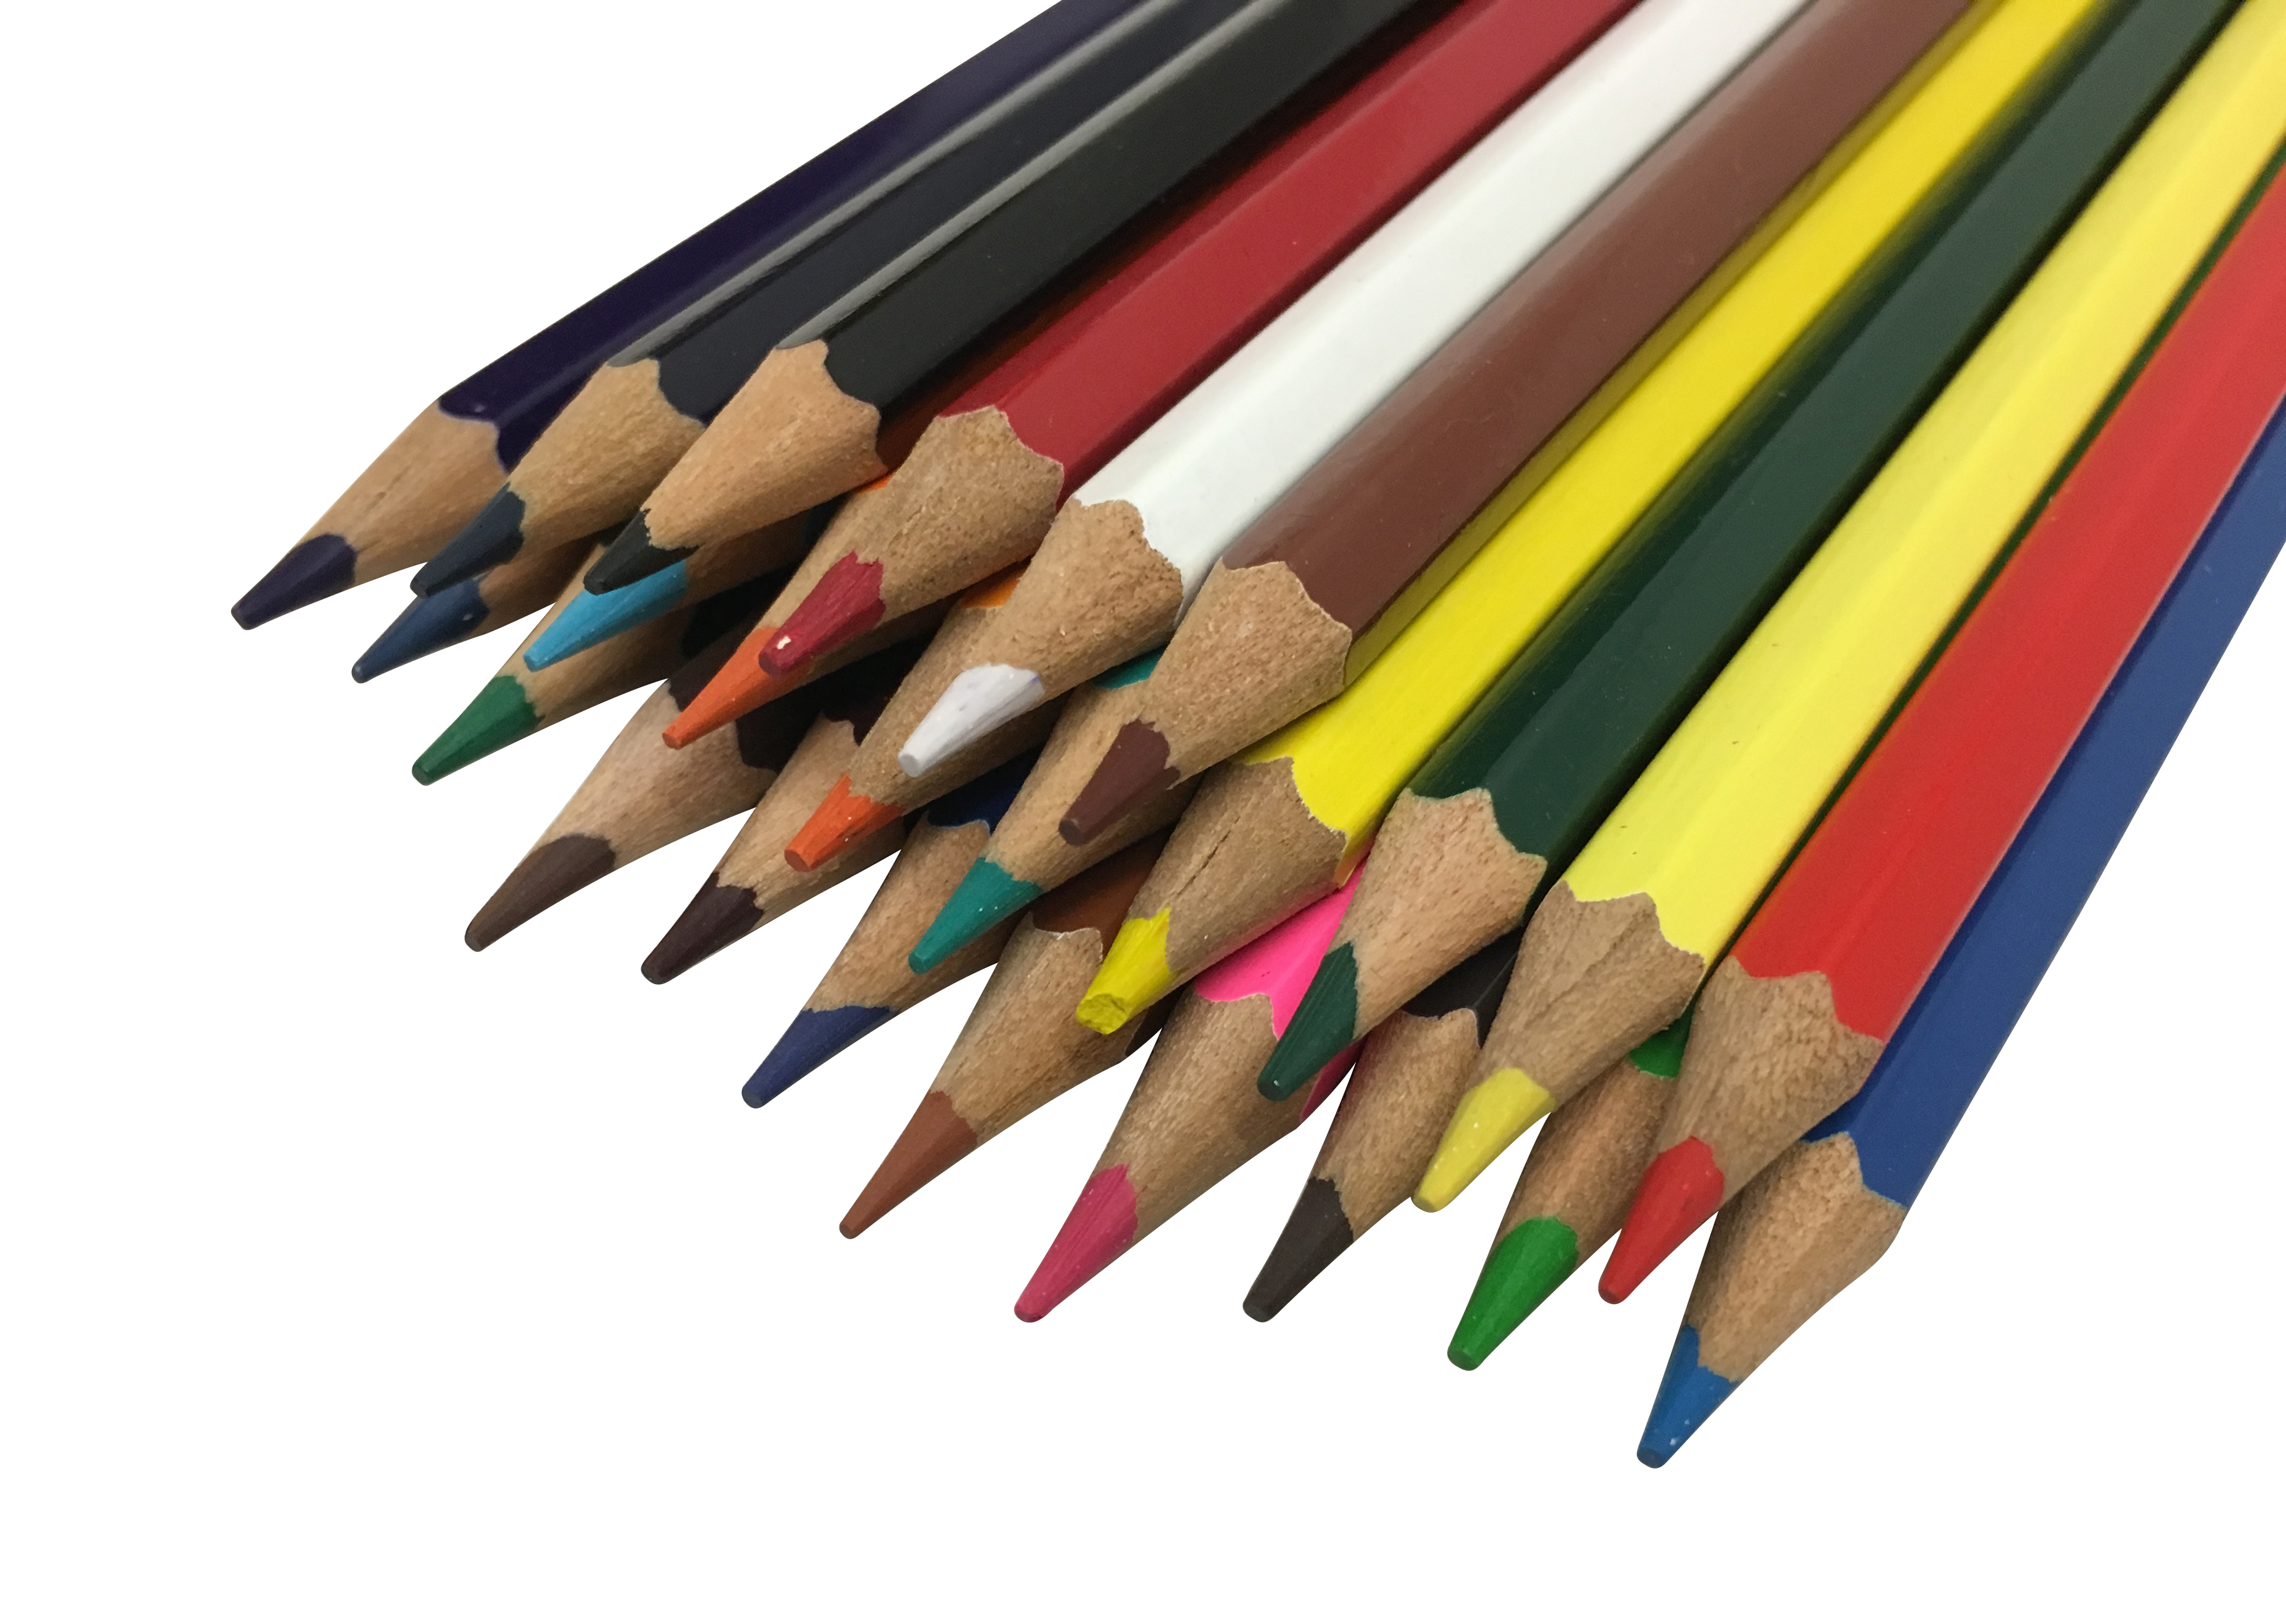 Colouring Pencil - 24 Assorted Colours Sharpened Long-Lasting Coloured Pencils Ideal for Drawing, Writing and Sketching by Arpan (ST-9670)